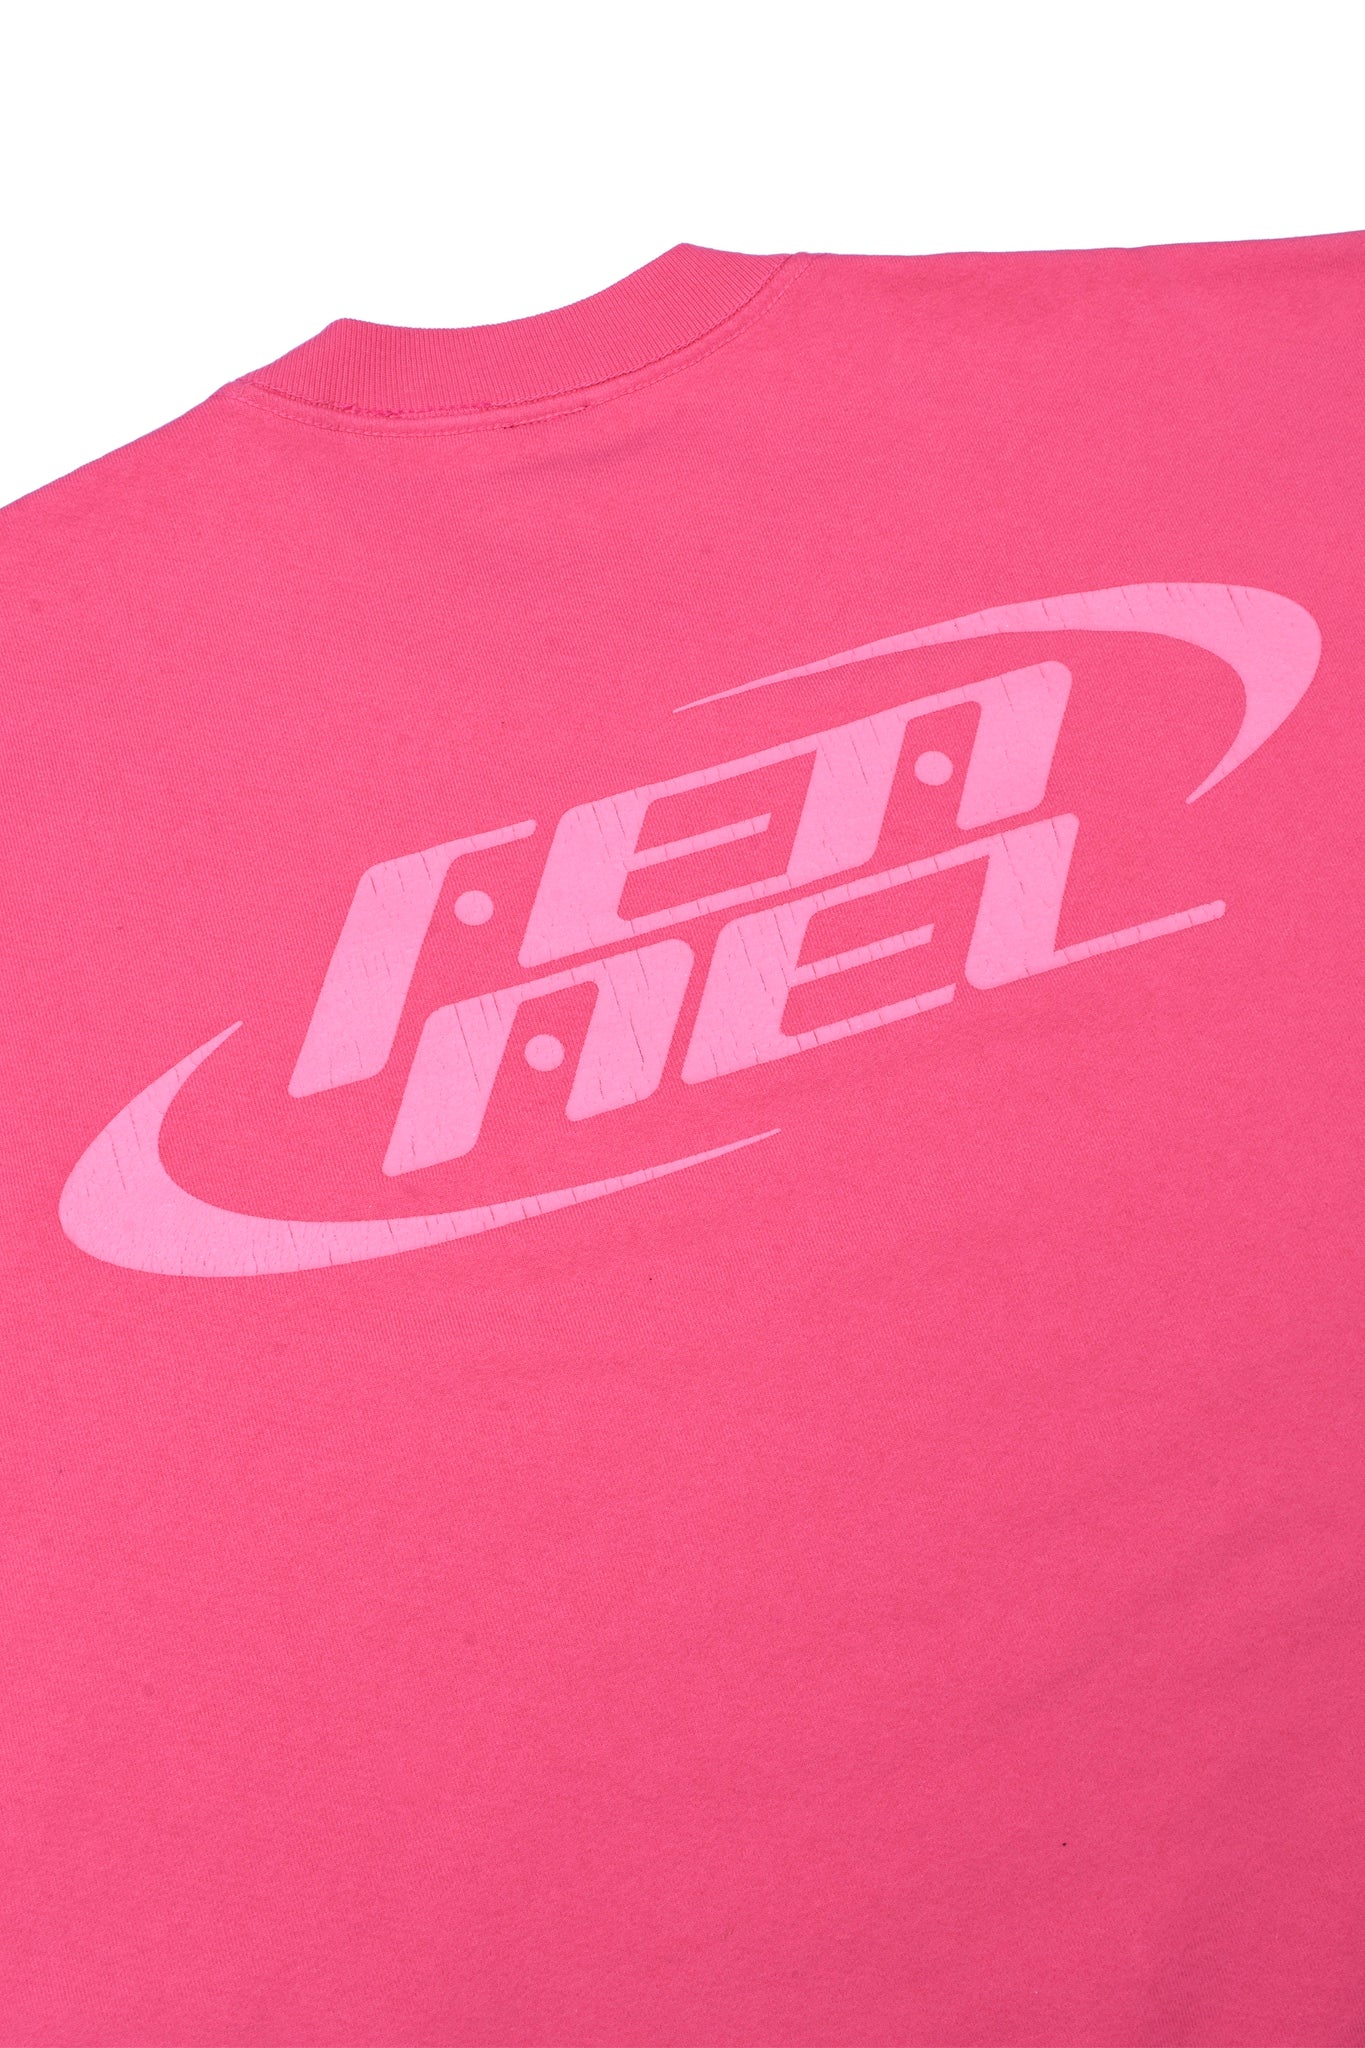 FENNEL × ECOCYCLE® GRAPHIC SWEAT/ELECTRIC PINK